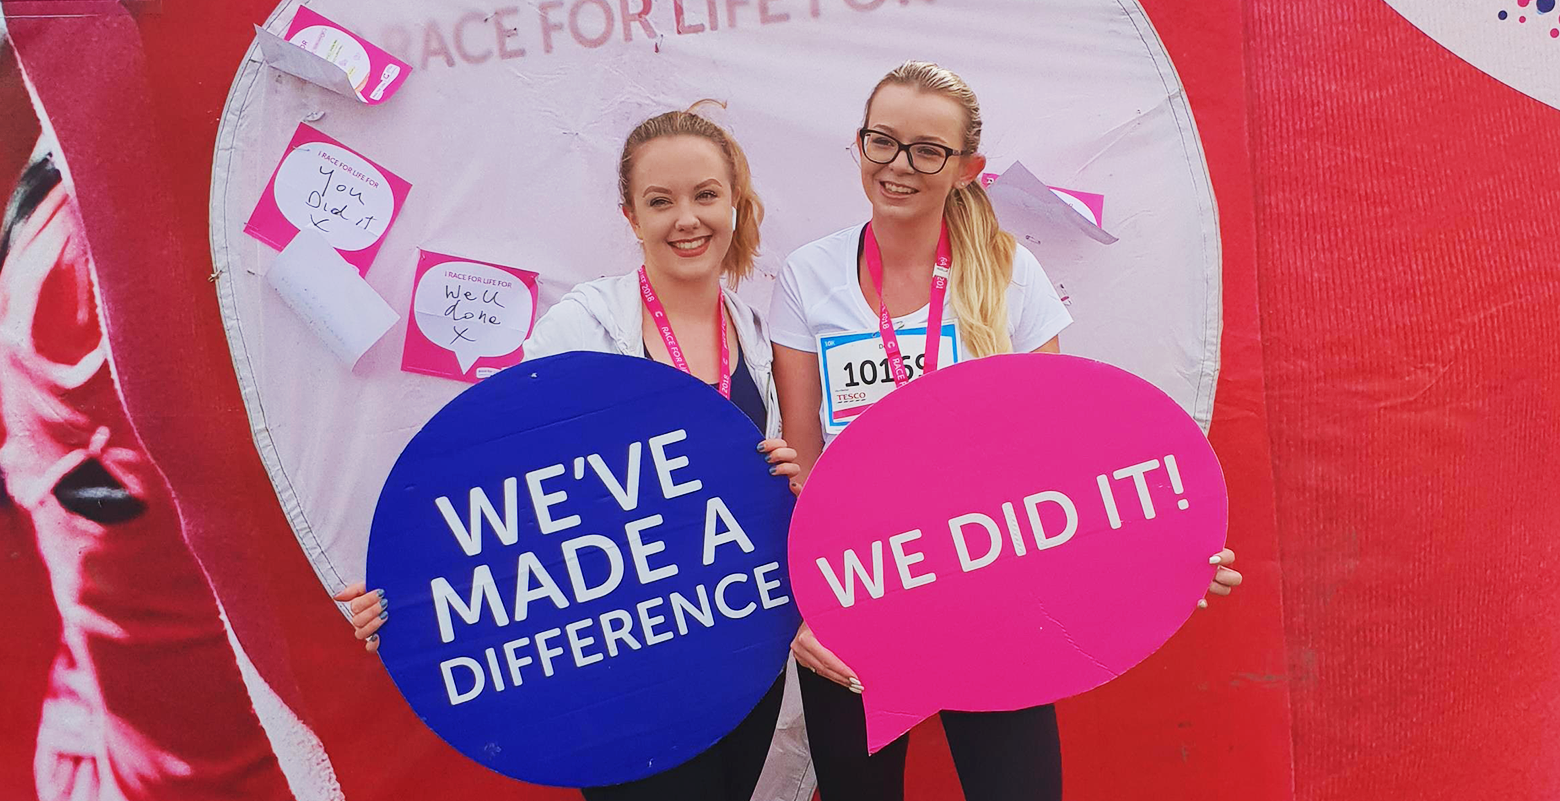 Charity Chapters: Abbie’s 10k Race for Life